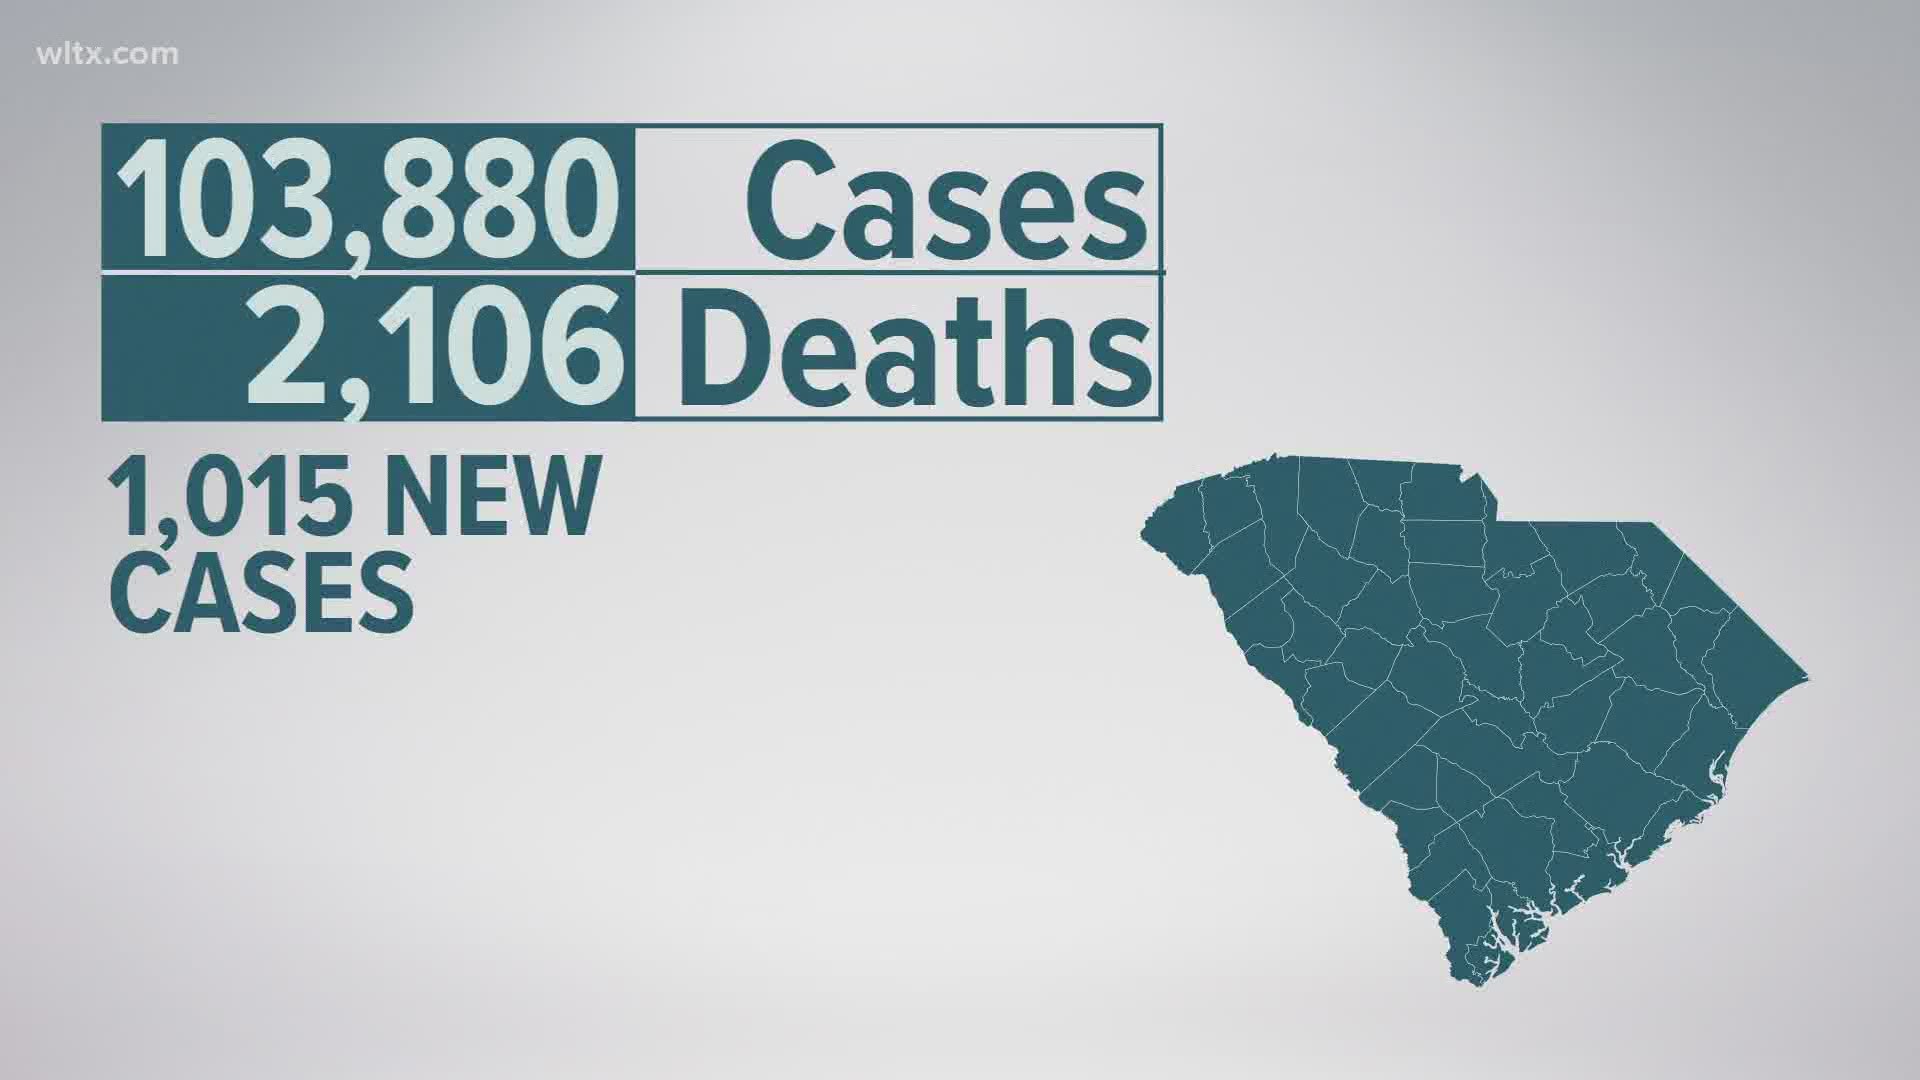 This brings the total number of confirmed cases to 103,880, probable cases to 961, confirmed deaths to 2,106, and 98 probable deaths.